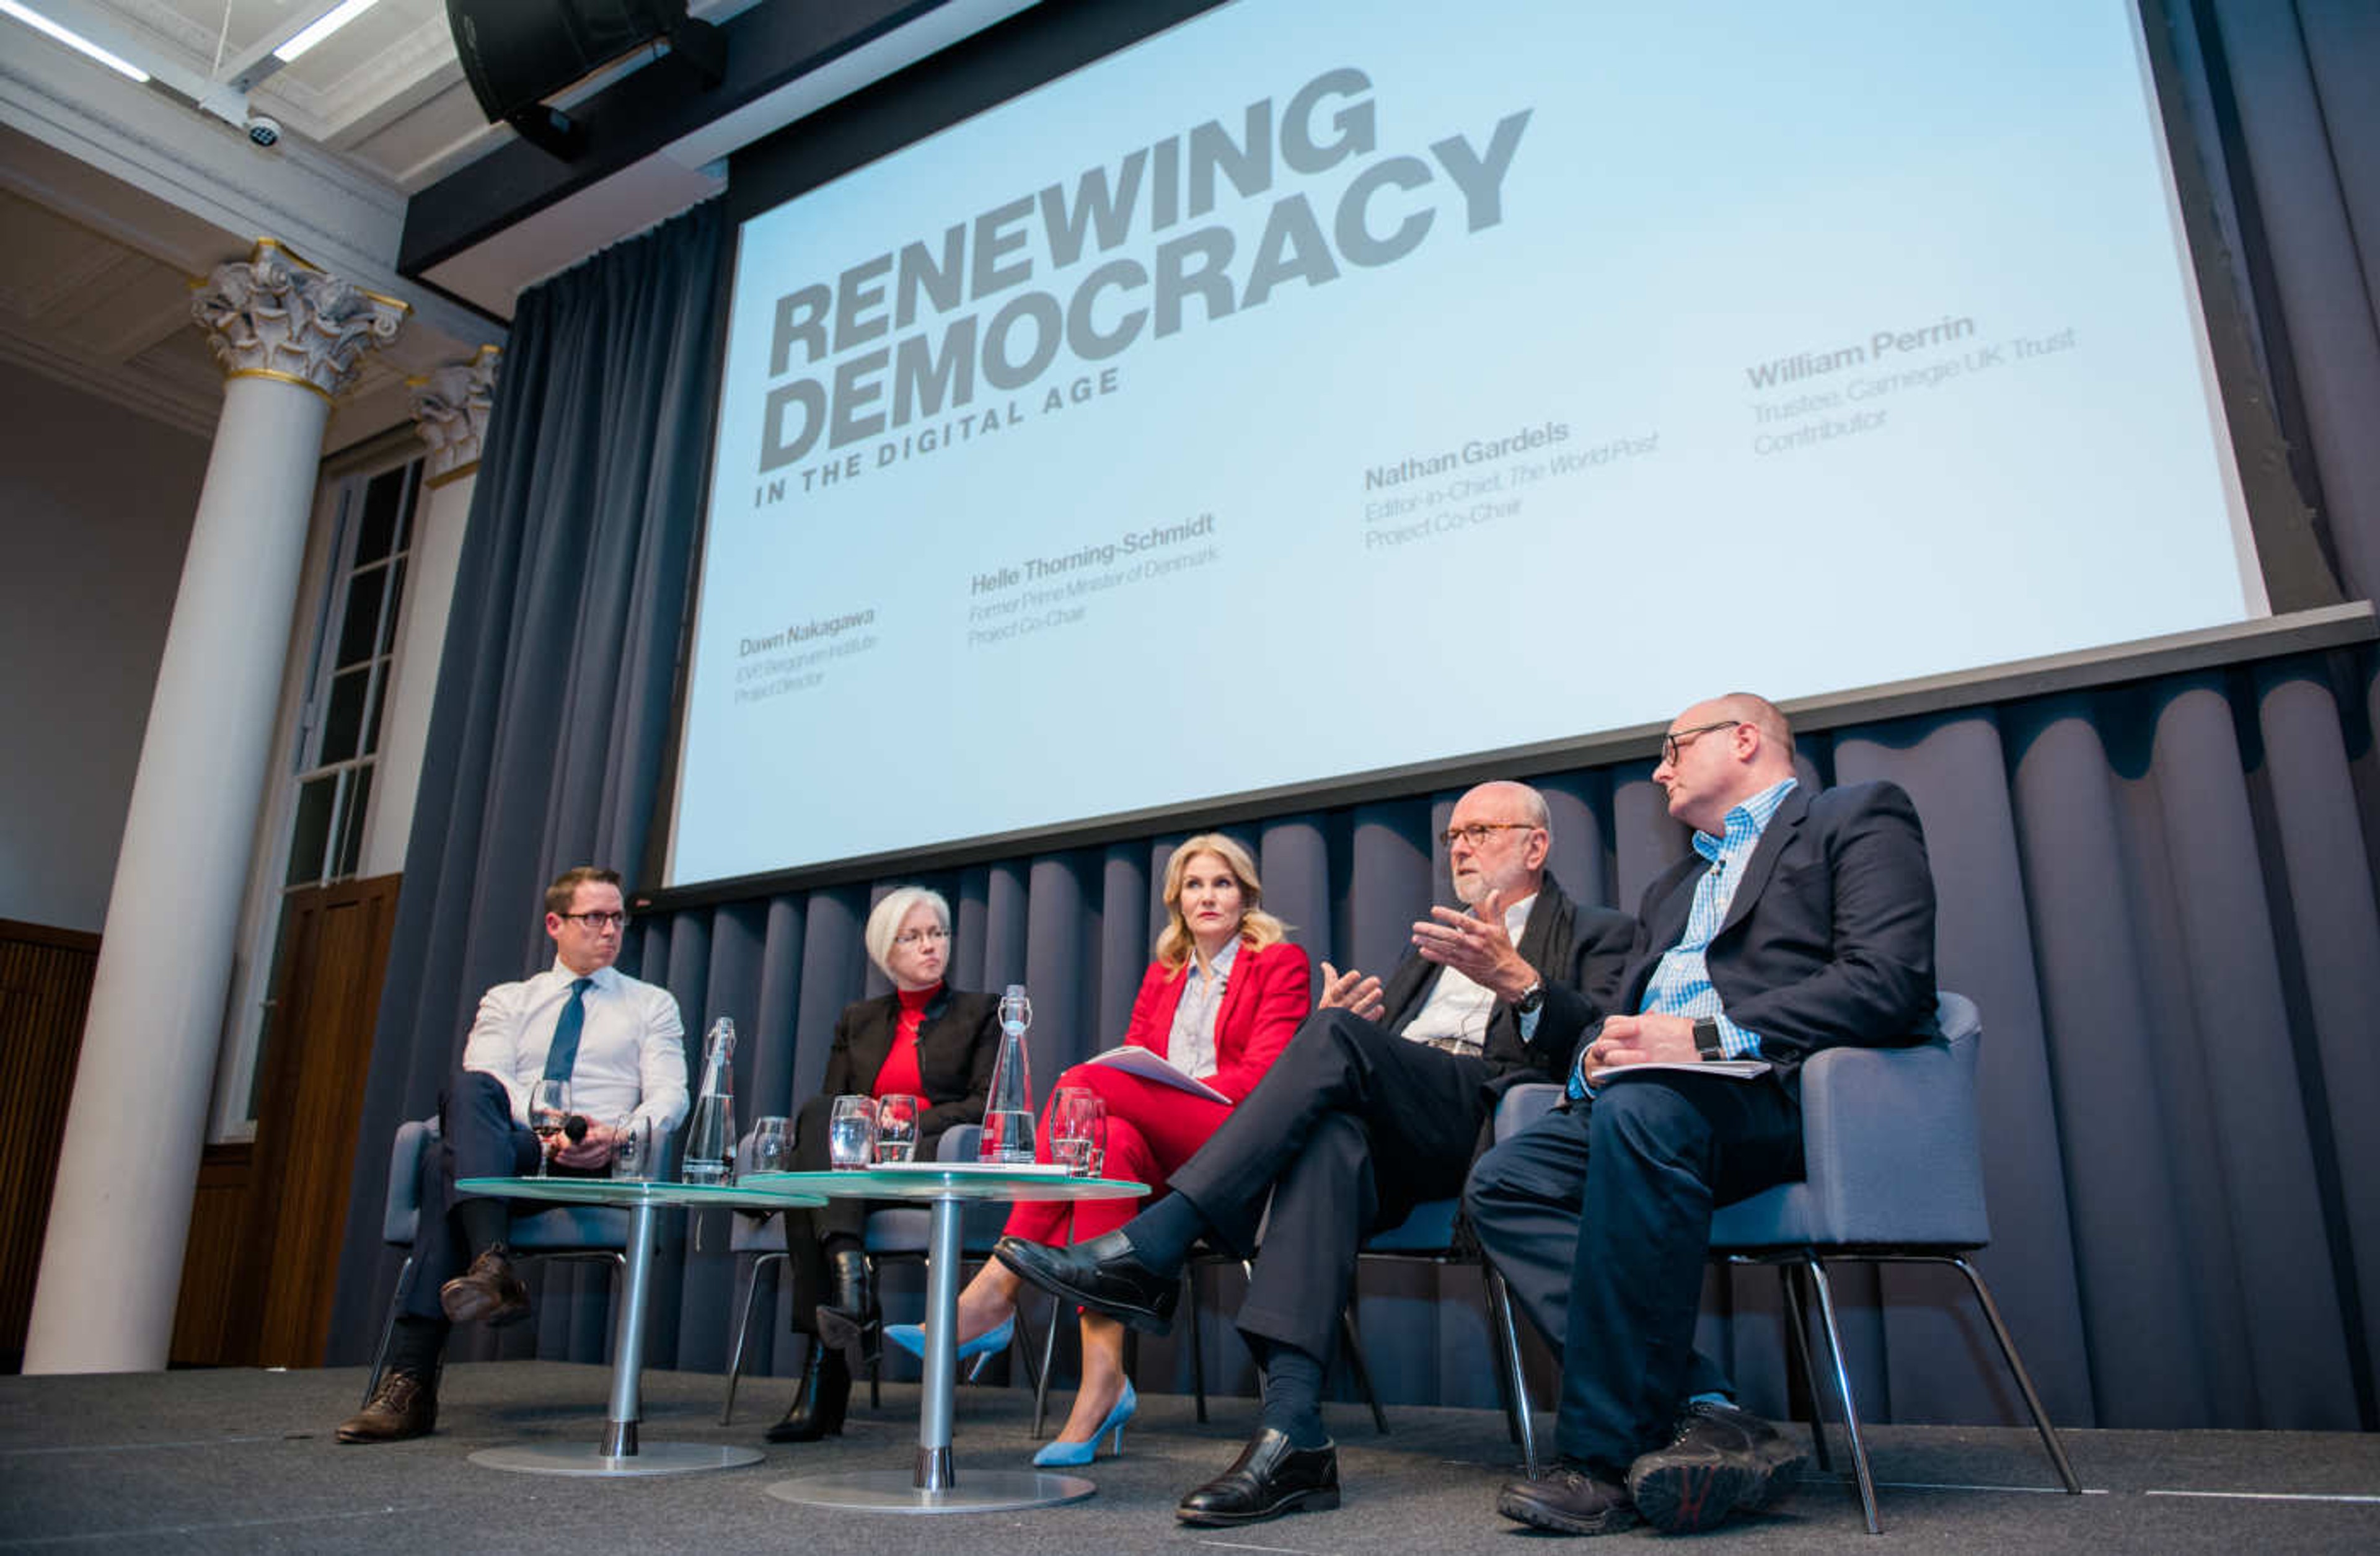 Matthew Browne, Dawn Nakagawa, Helle Thorning-Schmidt, Nathan Gardels, and William Perrin at Launch of "Renewing Democracy in the Digital Age" in London